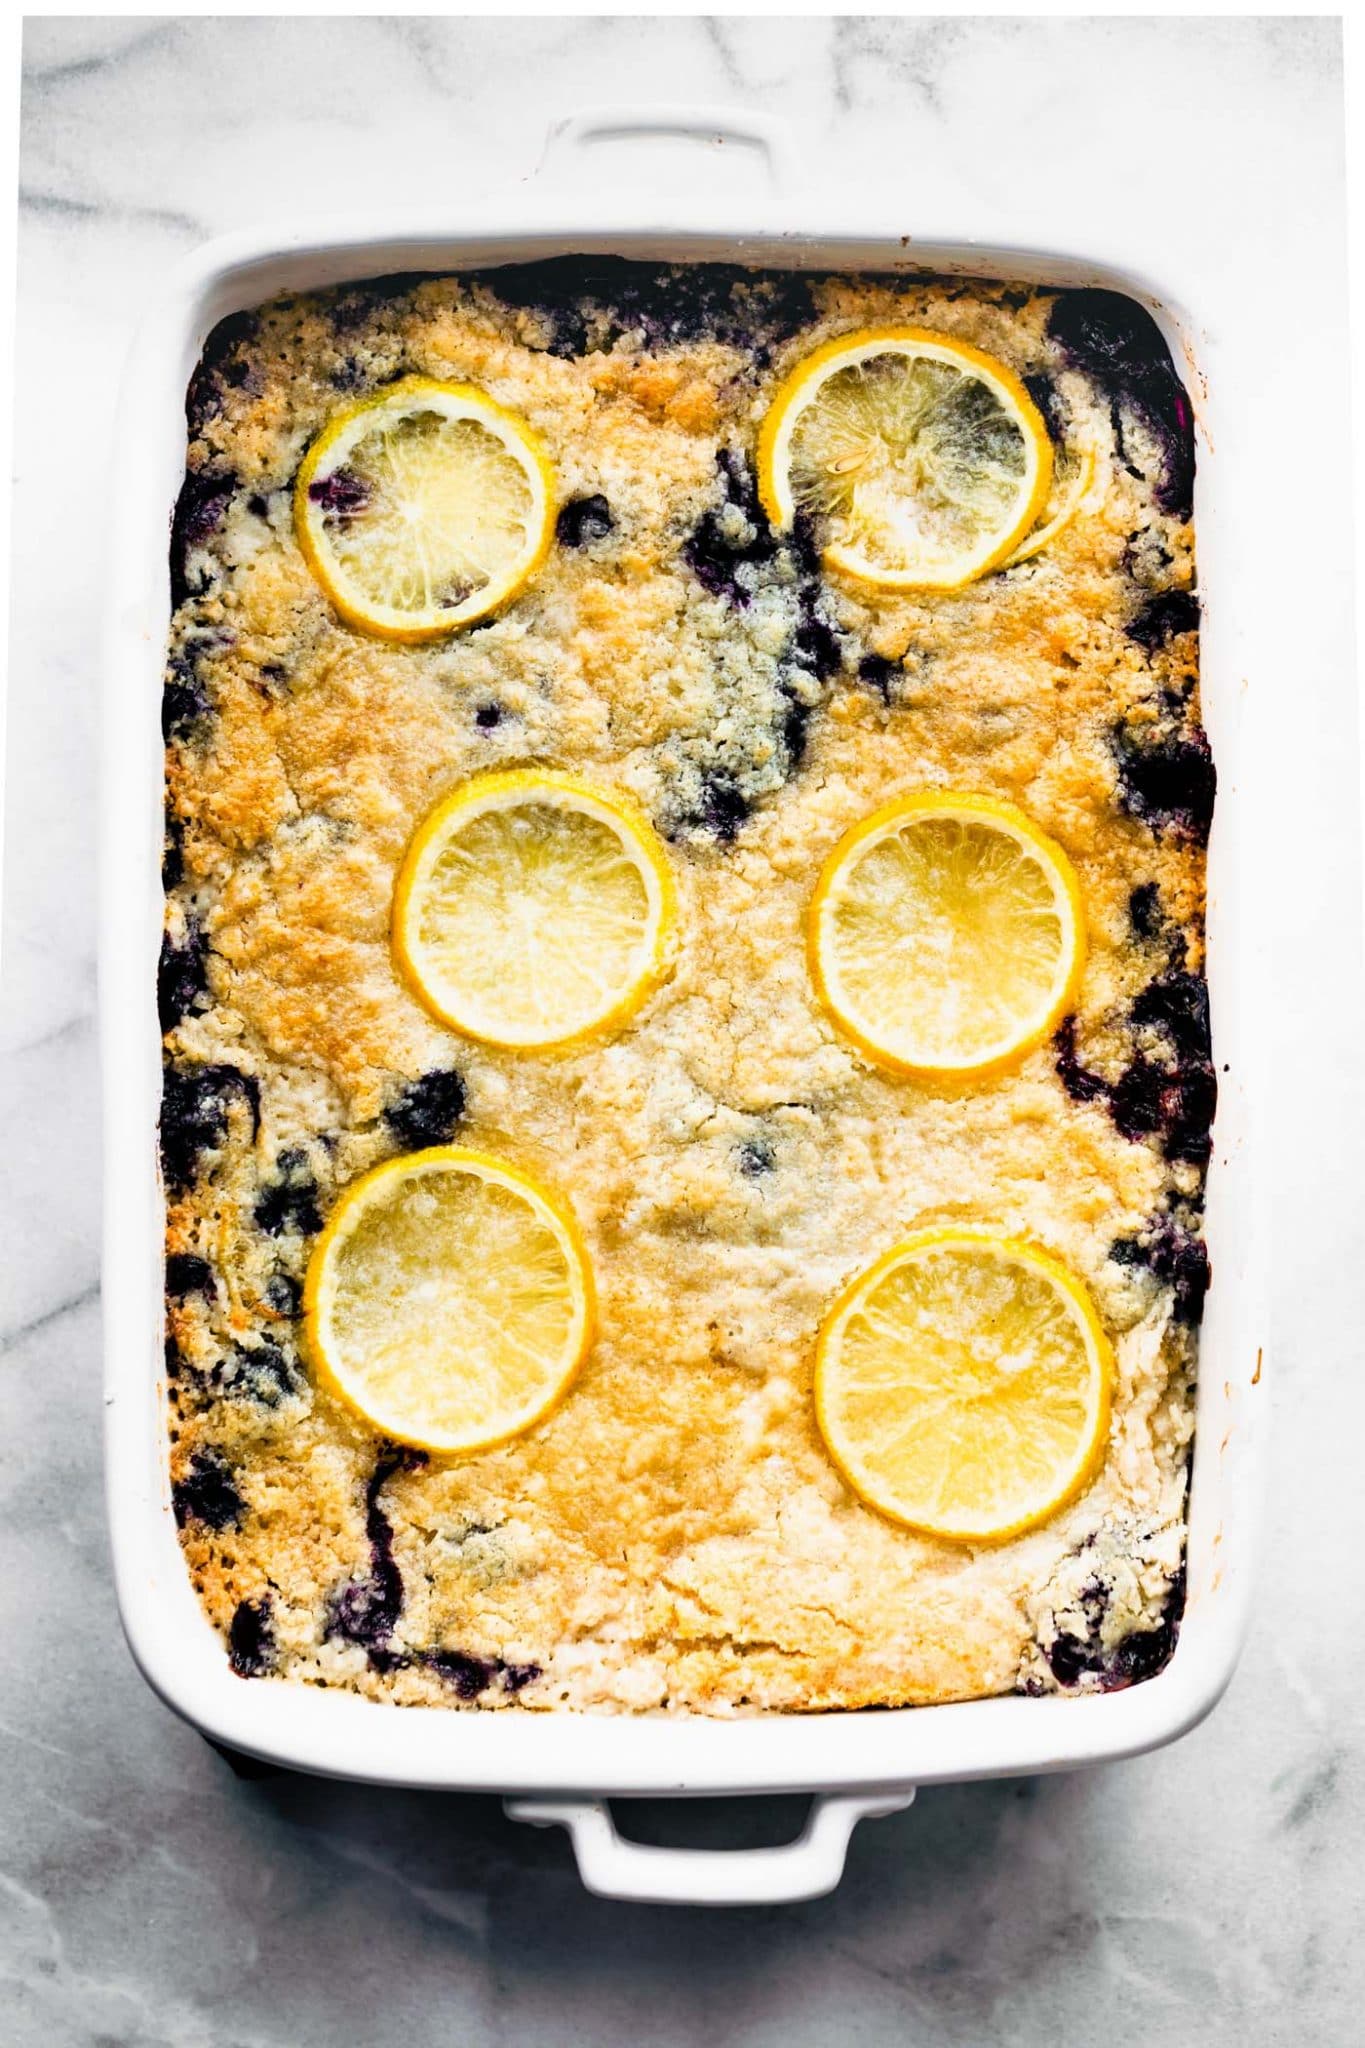 overhead photo: blueberries in a bowl, sliced in half lemon, coconut flakes in a bowl, stick of butter on a plate, bowl of gluten free flour